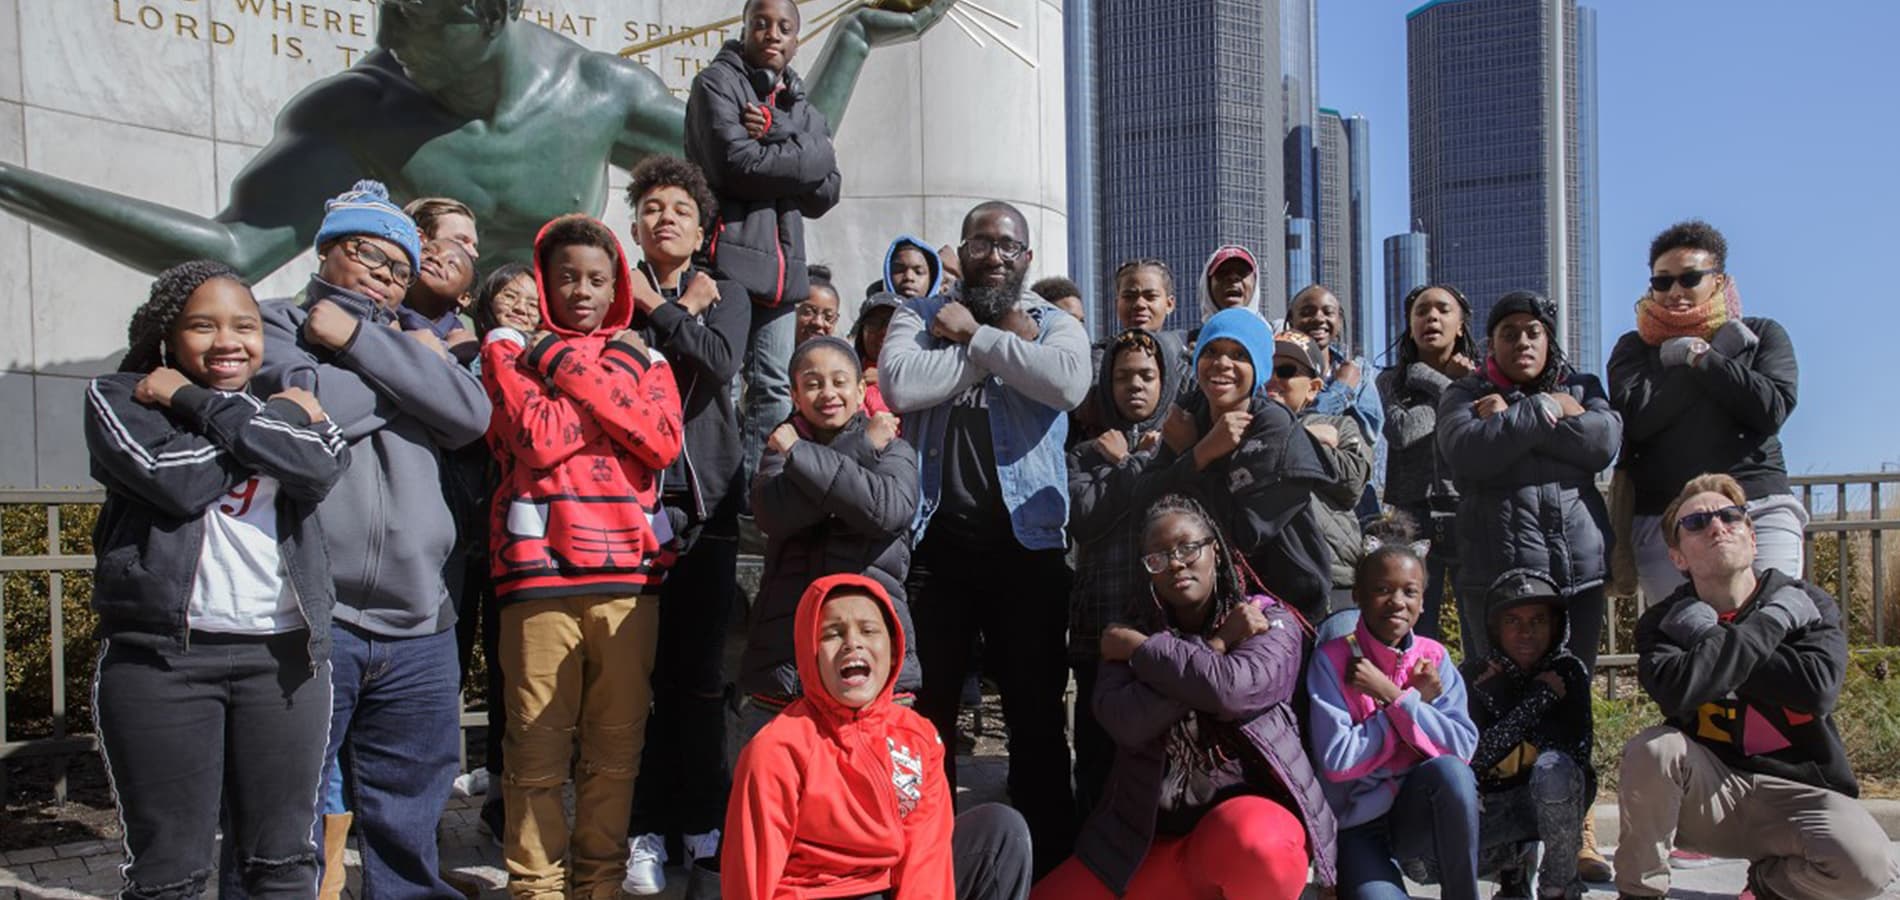 Michael Ford stands outdoors in front of an iconic statue in downtown Detroit, surrounded by more than a dozen children in sweatshirts and coats.